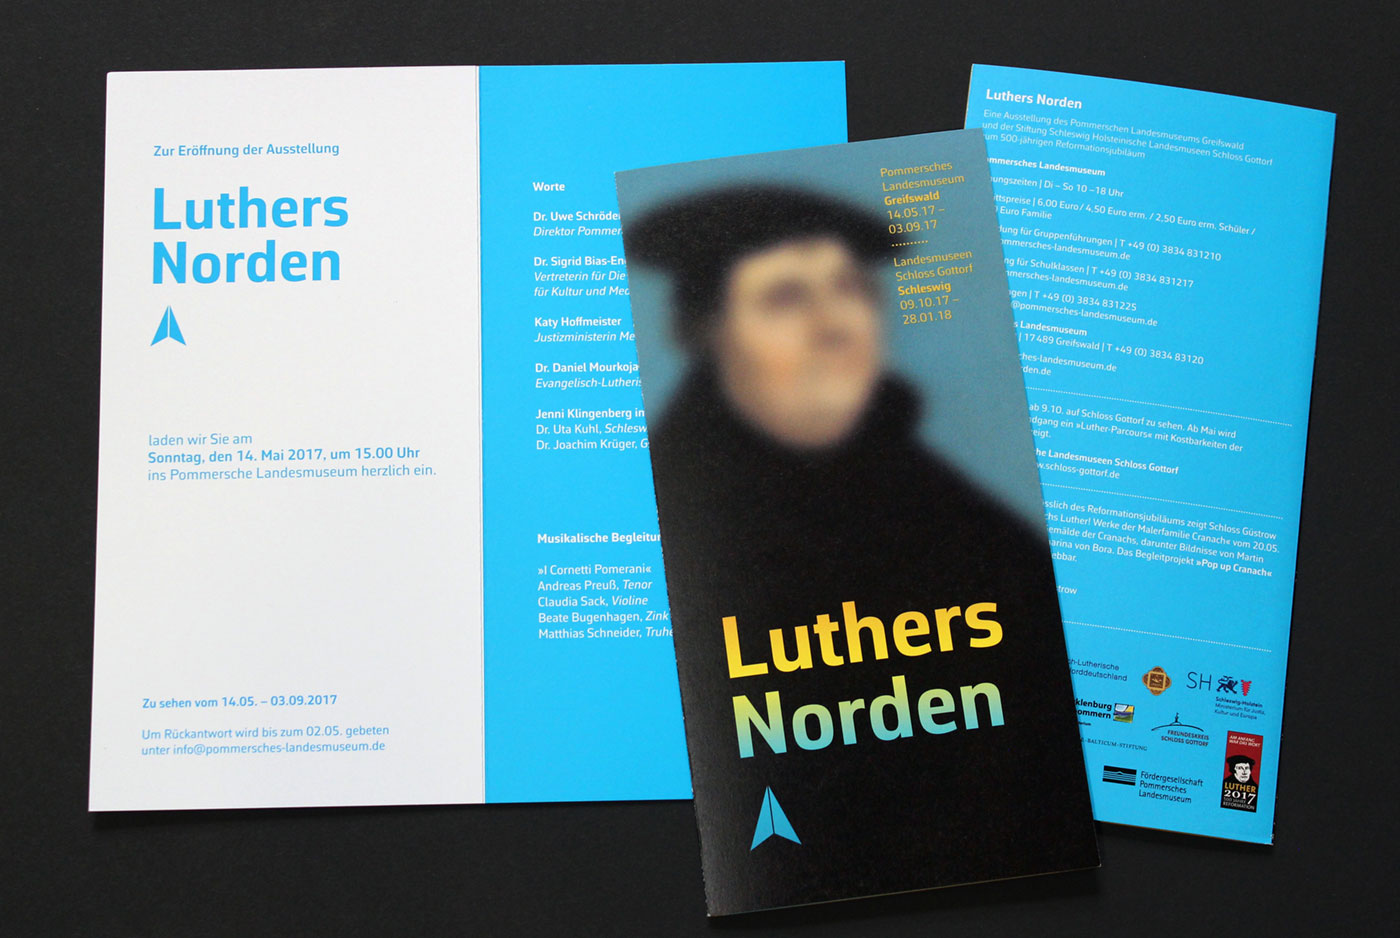 LUTHERS NORDEN